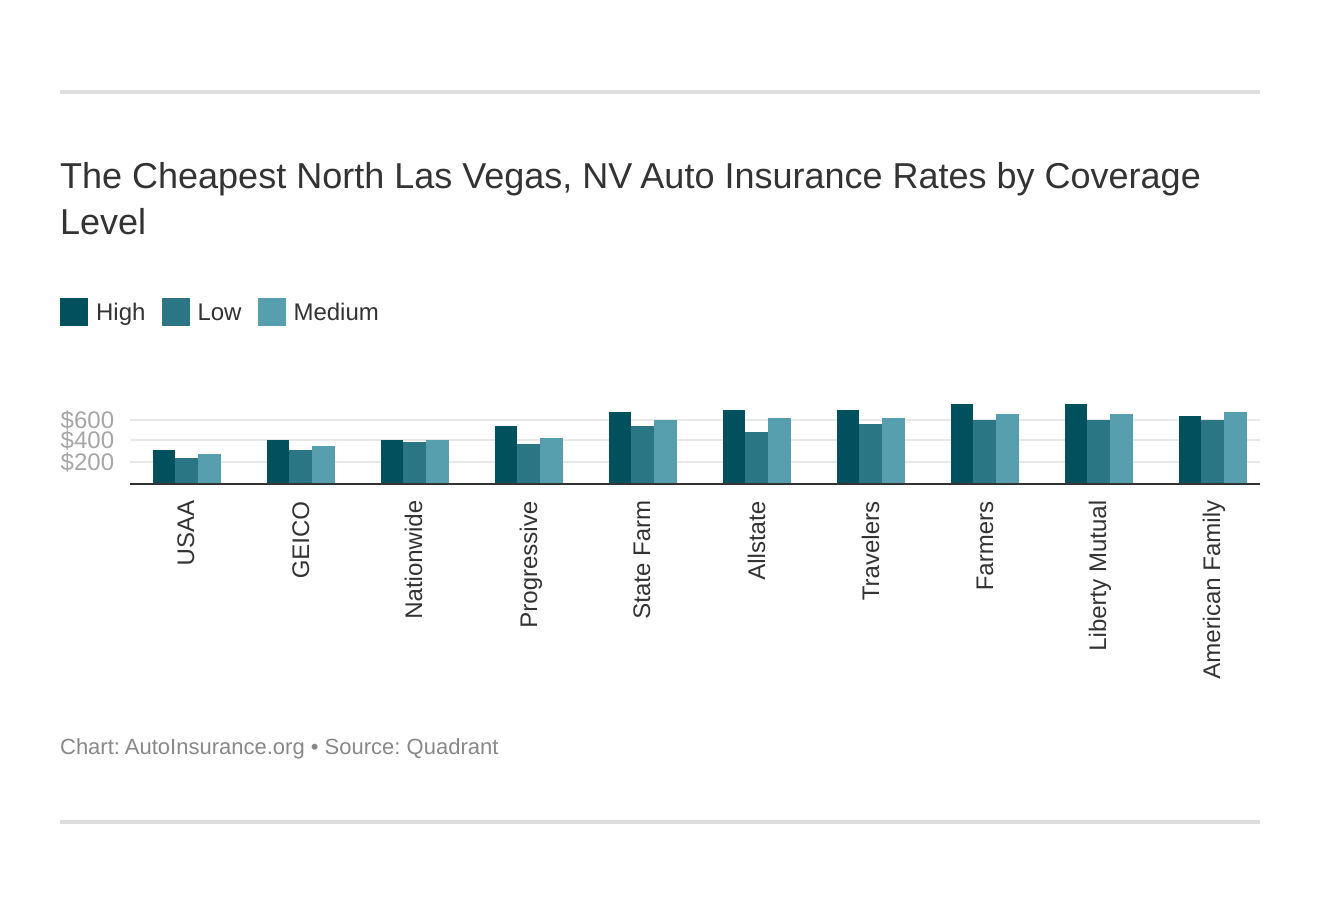 The Cheapest North Las Vegas, NV Auto Insurance Rates by Coverage Level